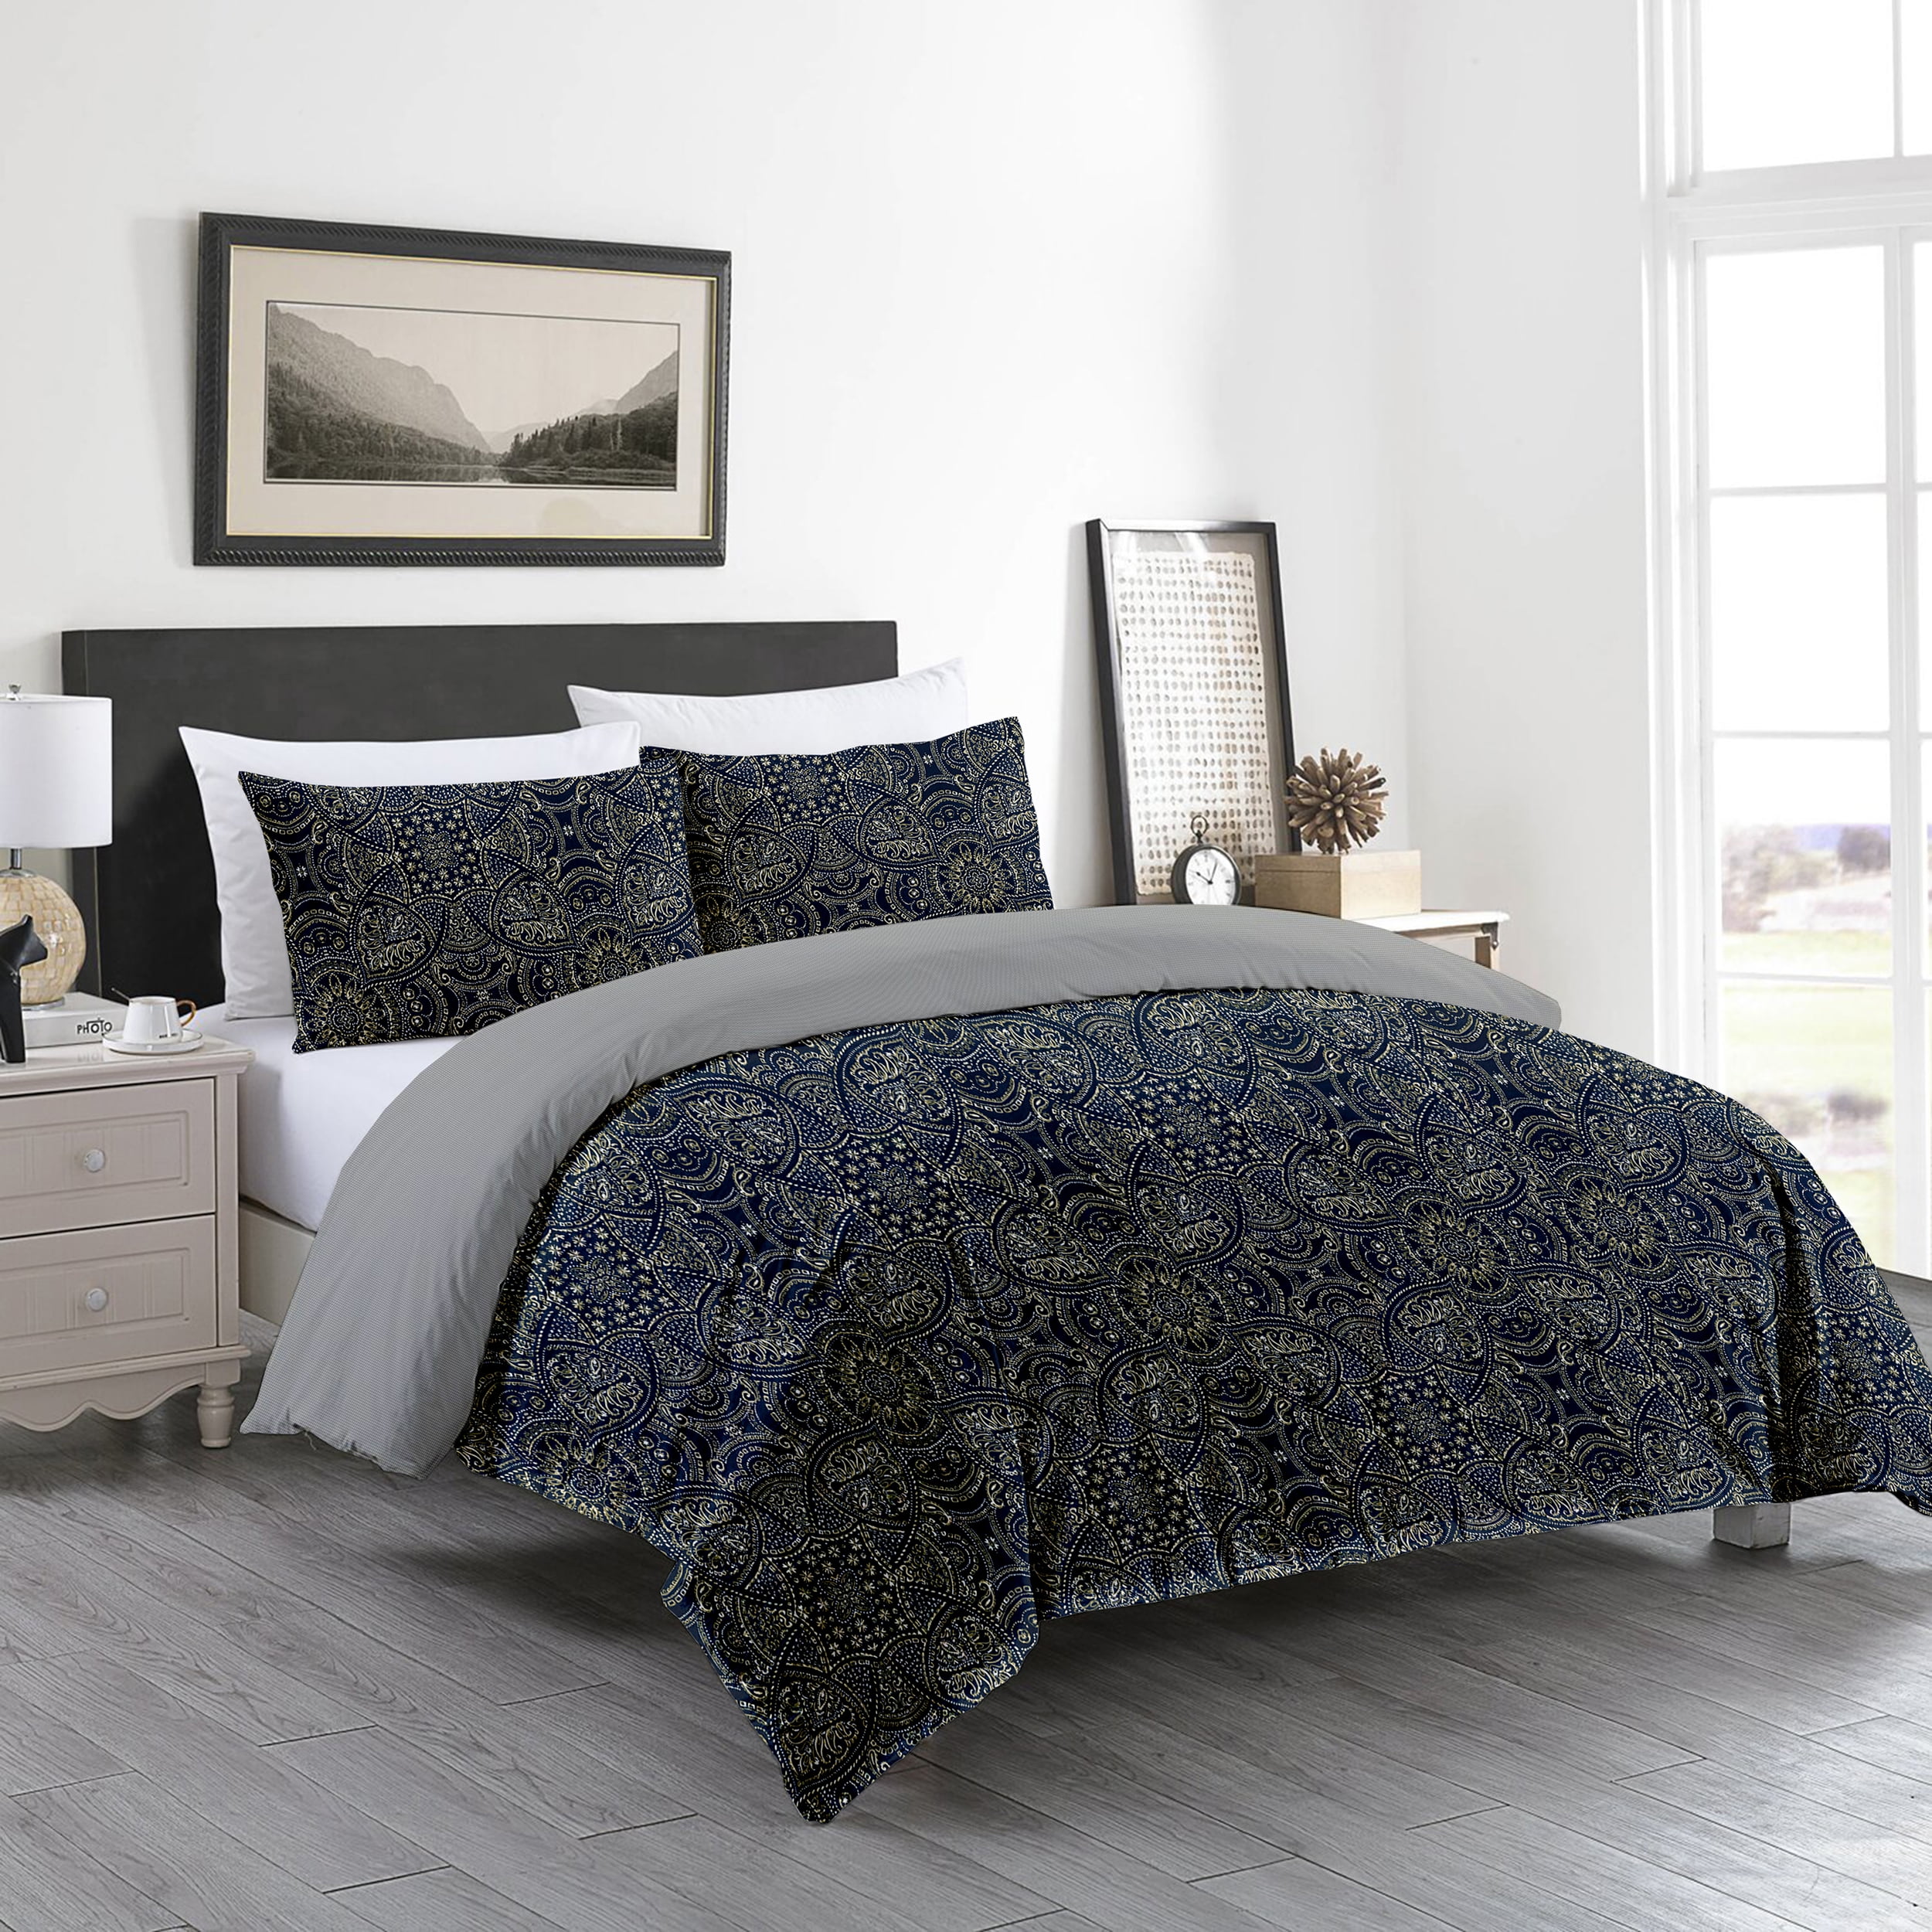 Printed With Cotton Satin Fabric And Certified Organic Dyes Duvet Cover Bedding Set Linens Set Young man